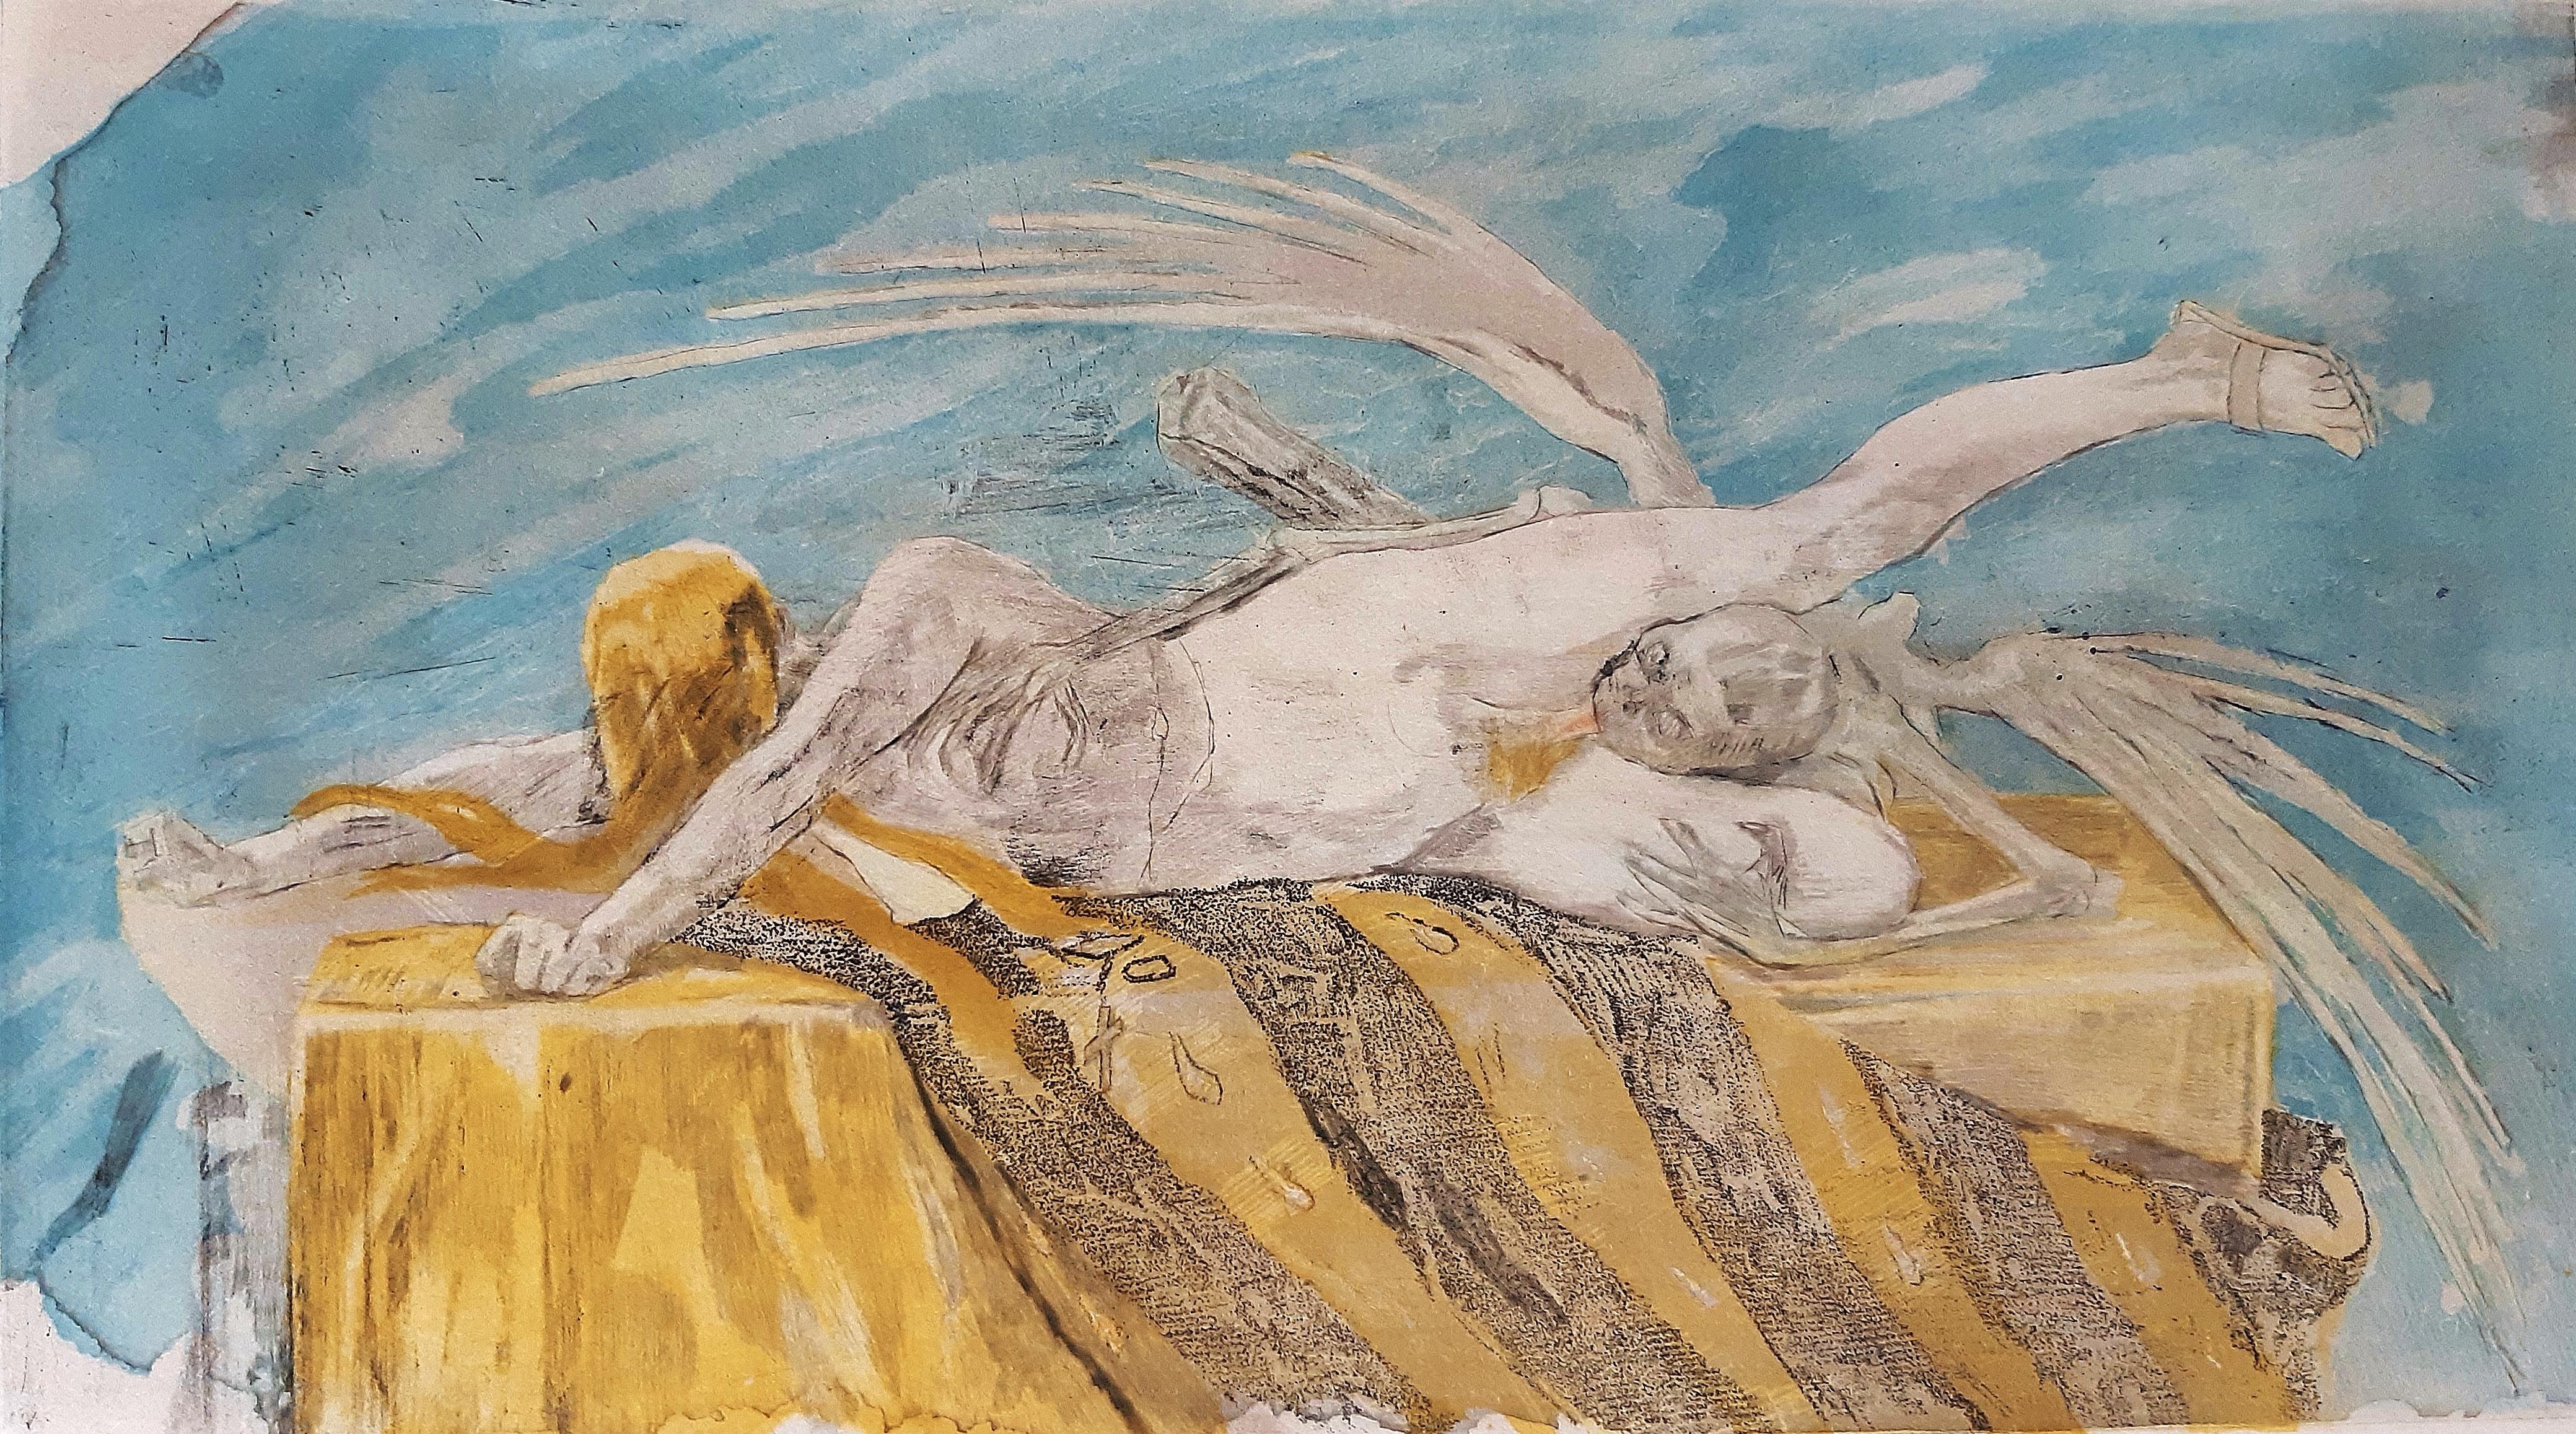 L'agonie - Etching by Félicien Rops - 1896